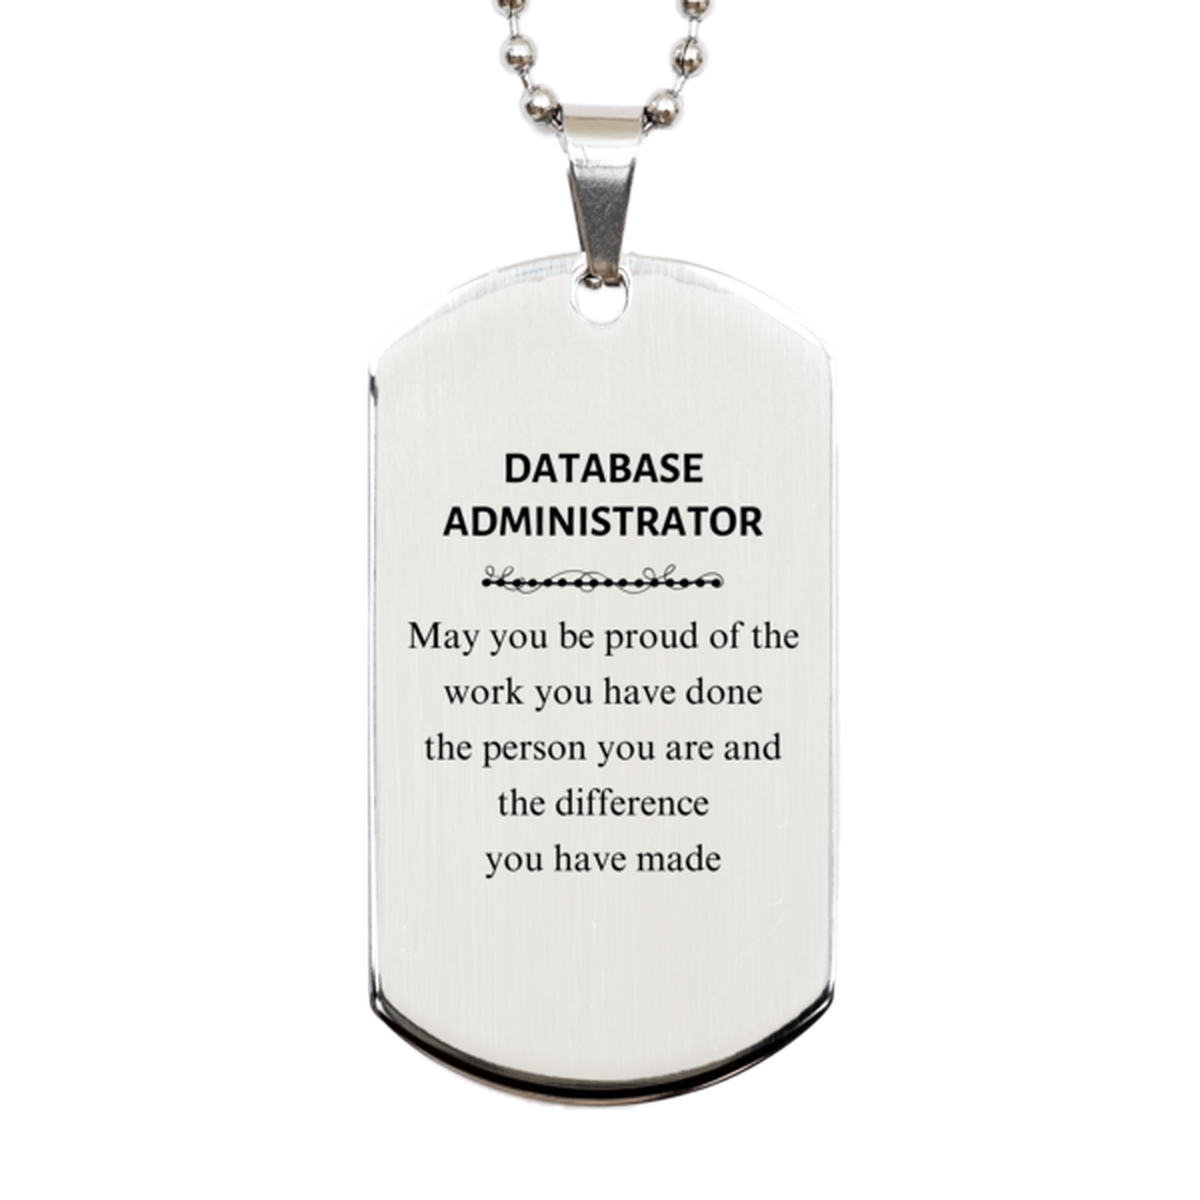 Database Administrator May you be proud of the work you have done, Retirement Database Administrator Silver Dog Tag for Colleague Appreciation Gifts Amazing for Database Administrator